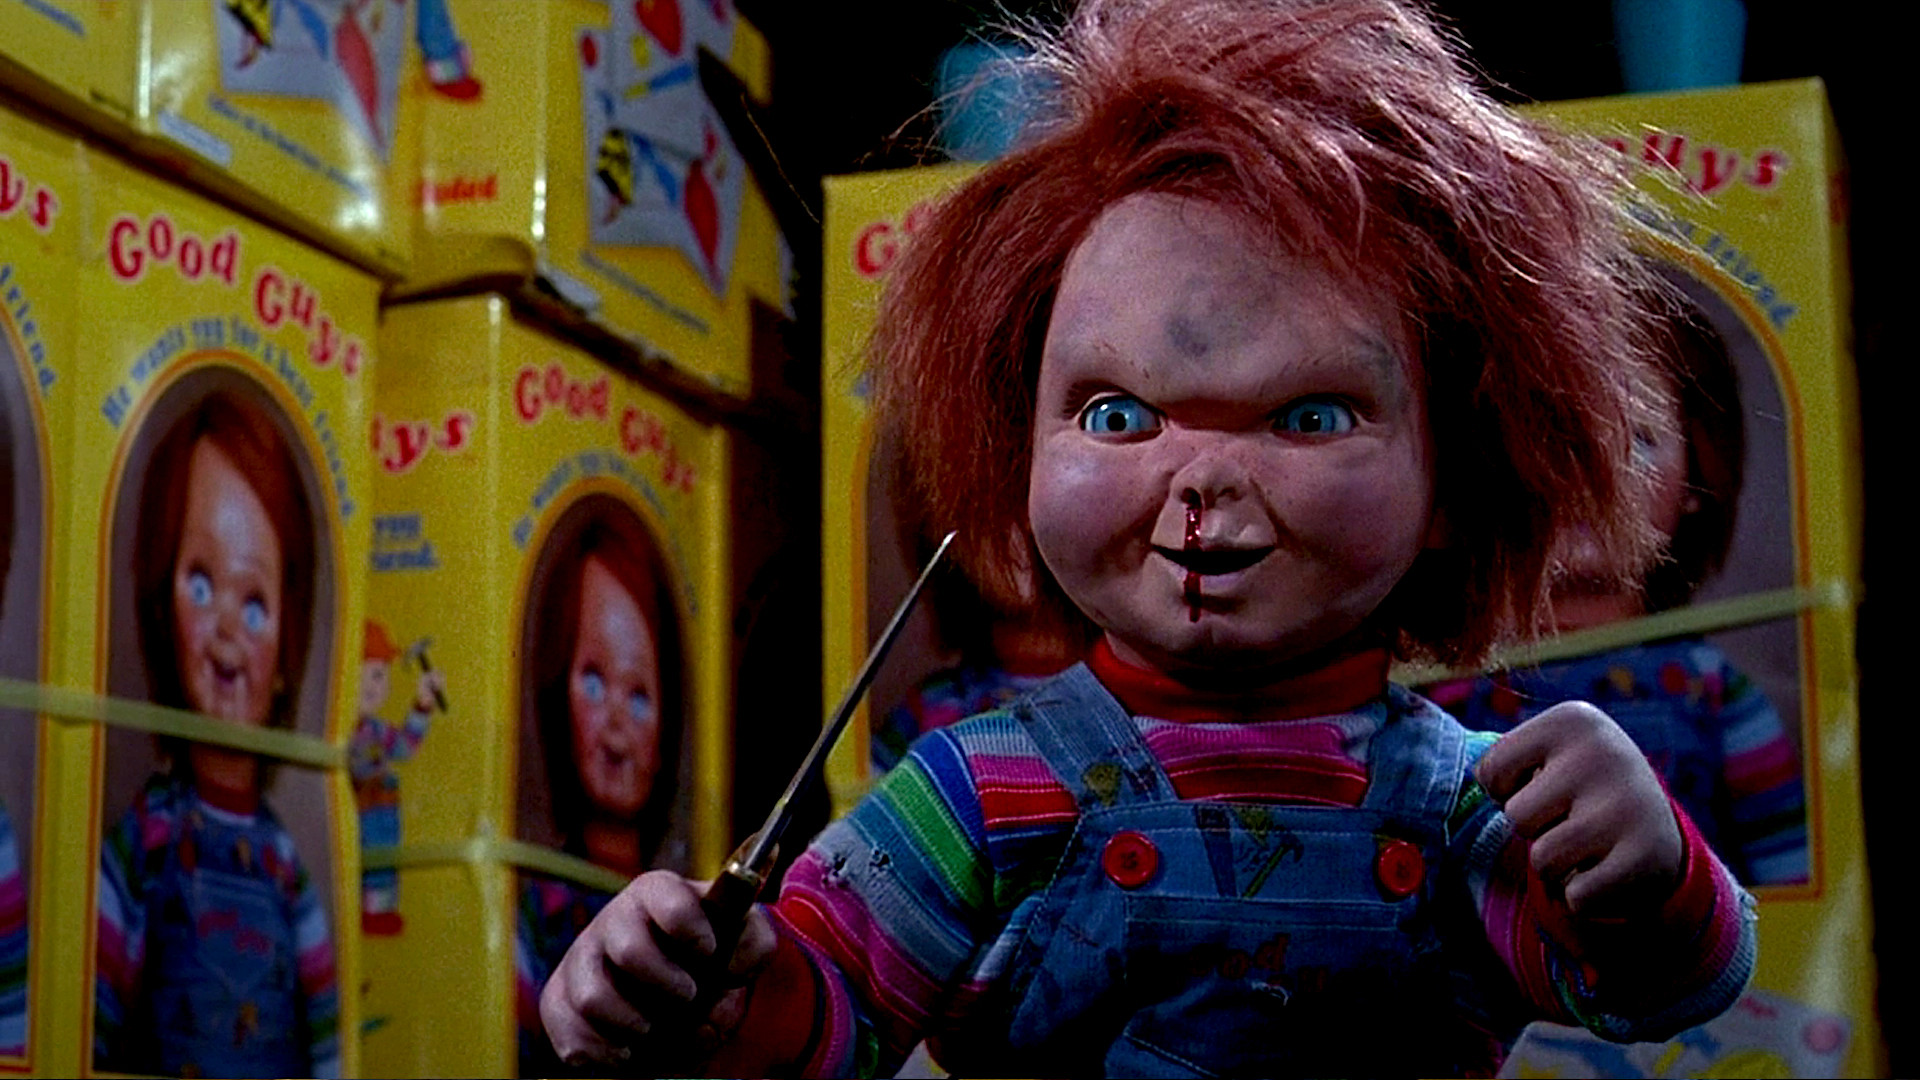 Chuckys back CULT OF CHUCKY details, teaser released